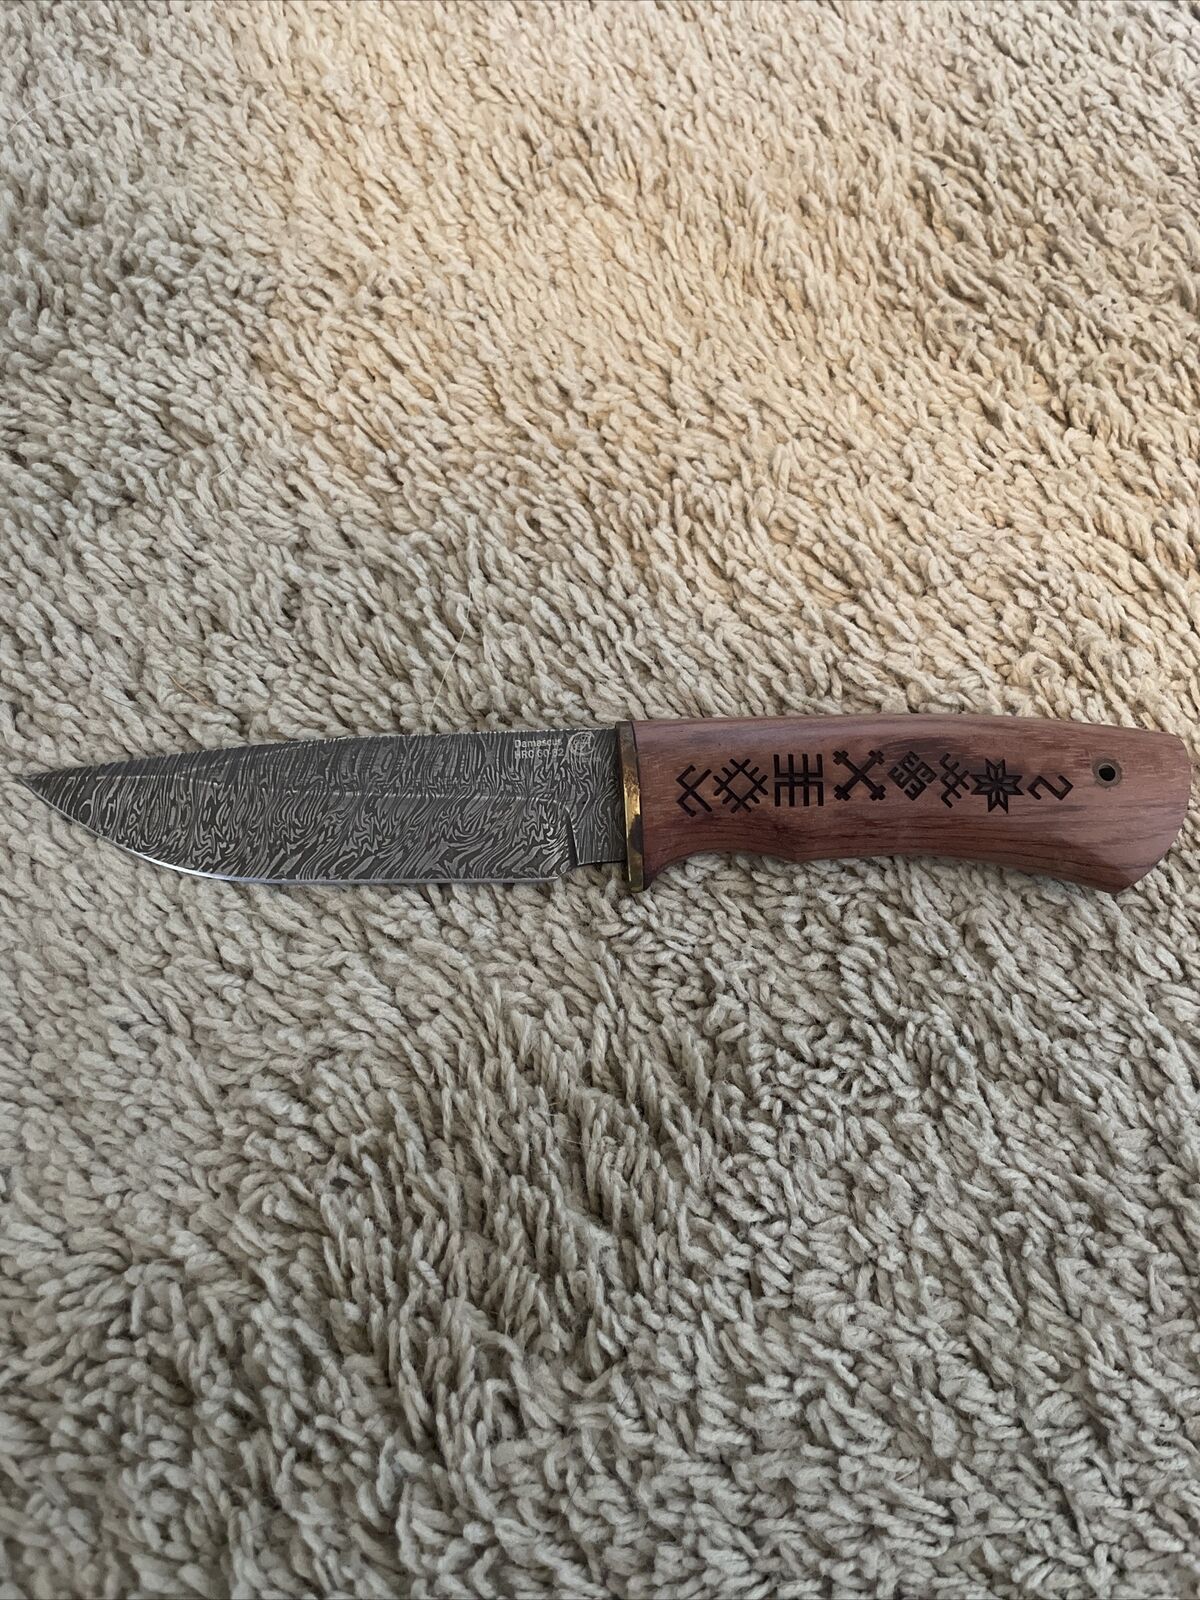 Fixed Blade Knife Pagan Carvings